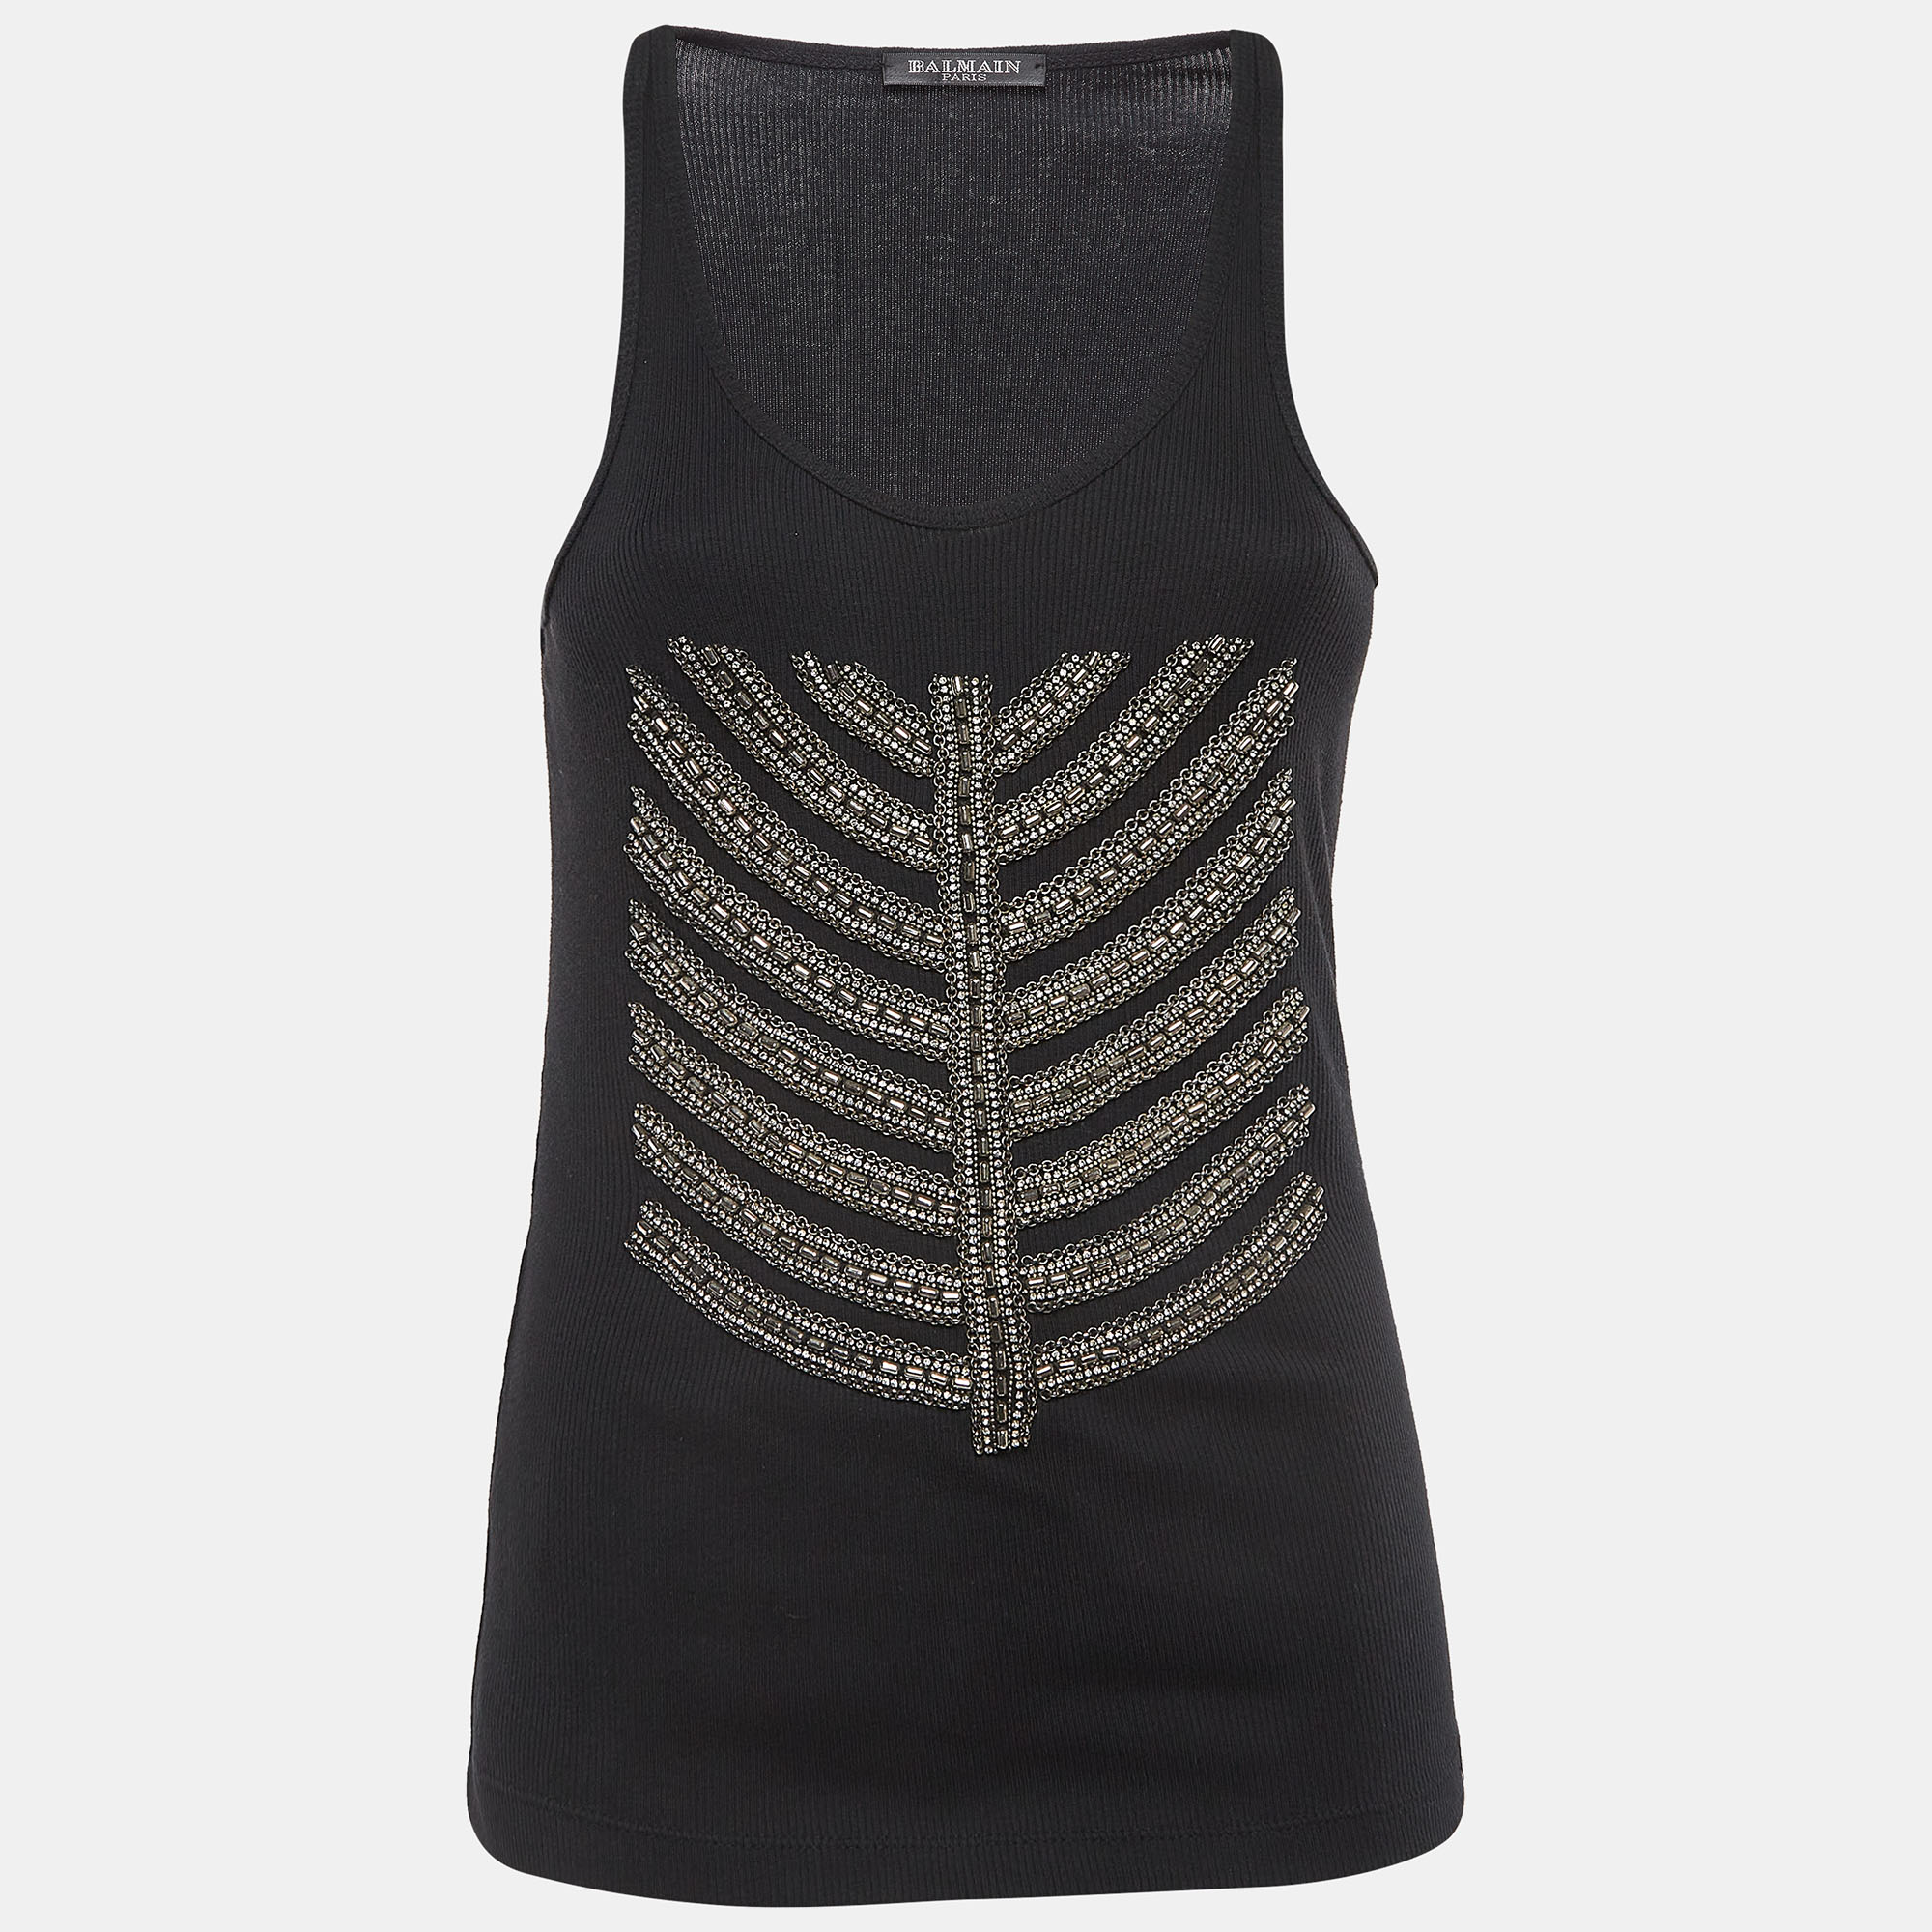 Pre-owned Balmain Black Cotton Knit Metallic Chain And Crystal Embellished Tank Top M